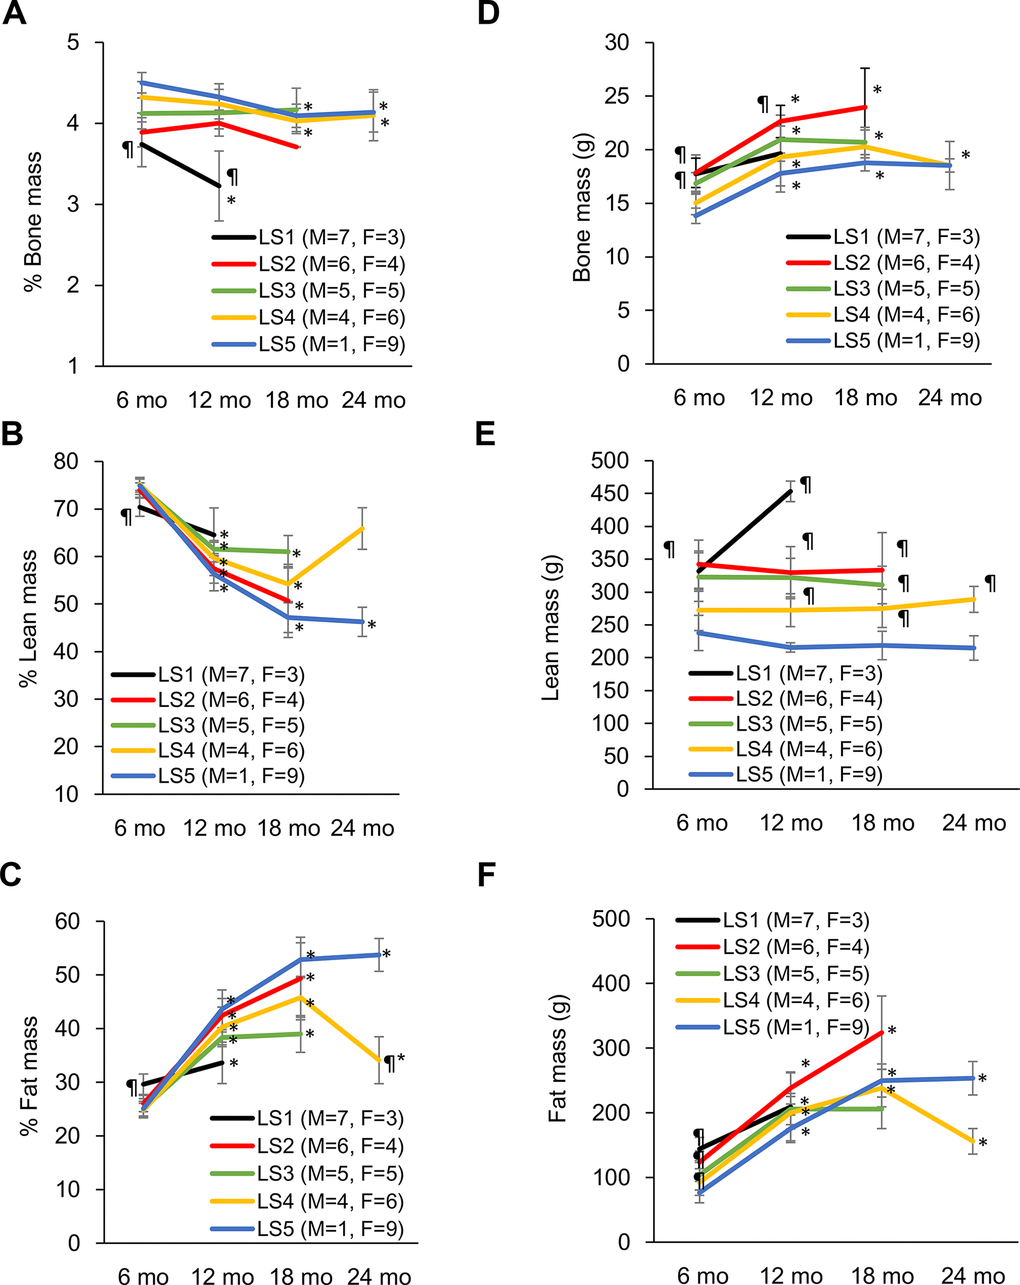 Development of disparity in muscle, bone, and fat percentage of short-lived and long-lived rats during aging. Long-lived rats (LS4 and LS5) are characterized by relatively higher % bone mass from 6 to 24 months of age (A). Short-lived rats had lowest % muscle mass (B) and highest % fat mass (C) at 6 months of age, whereas long-lived survivors showed progressive declines in % muscle mass and increases in % fat mass with age. Absolute bone mass (D), lean mass (E), and fat mass (F) are shown on the right side. Abbreviation: LS, lifespan; LS1 (short-lived, survival time th month, P 